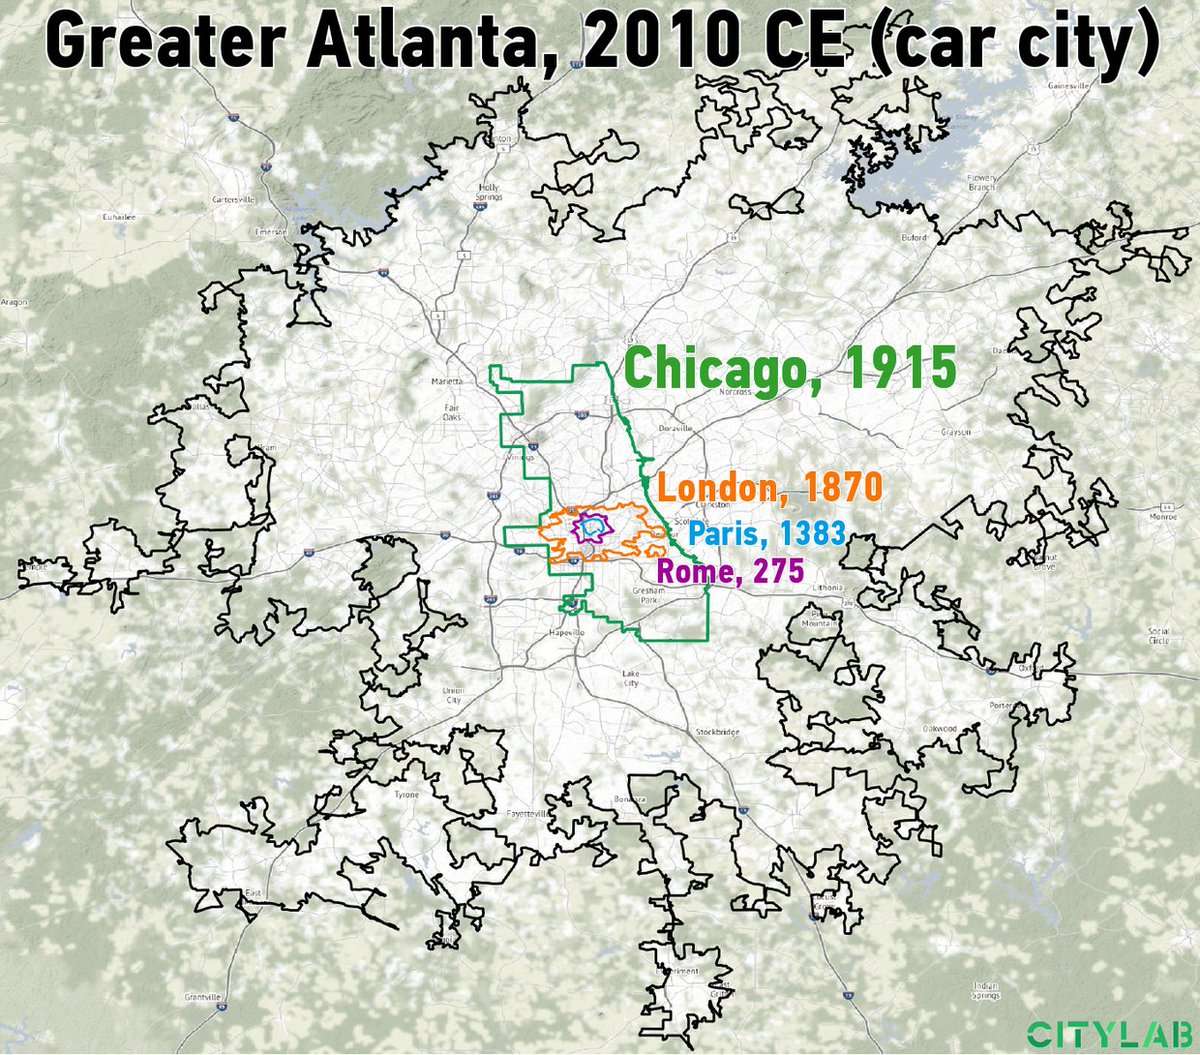 [12/11] When we mistakingly see increasing speed as solution, we forget that travel time (not travel distance) is fixed. Our contemporary cities are the physical manifestation of that flaw: https://www.citylab.com/transportation/2019/08/commute-time-city-size-transportation-urban-planning-history/597055